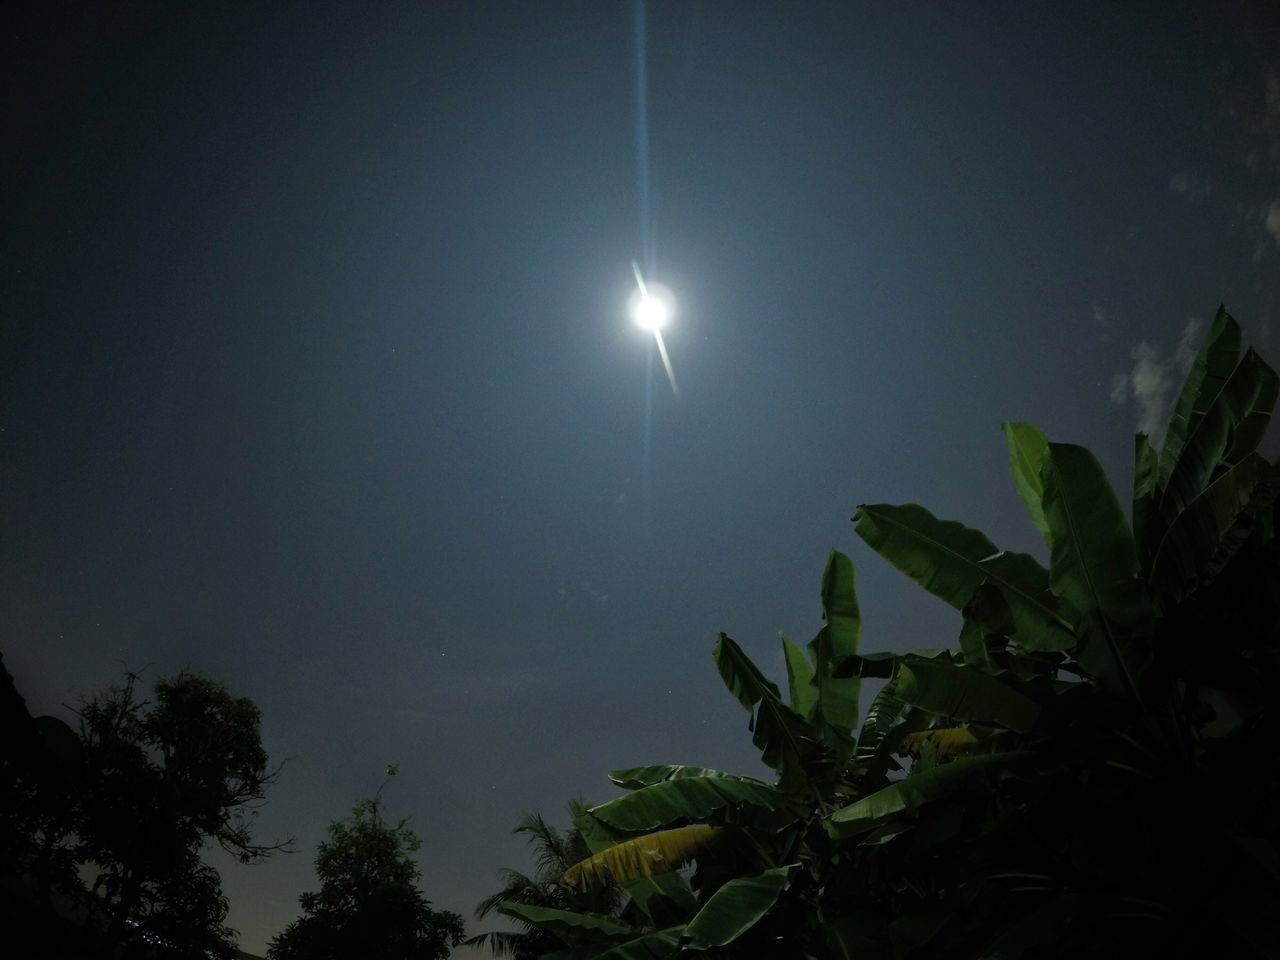 sky, plant, beauty in nature, moon, nature, night, scenics - nature, no people, tree, space, growth, tranquility, astronomy, full moon, moonlight, leaf, outdoors, plant part, tranquil scene, low angle view, planetary moon, eclipse